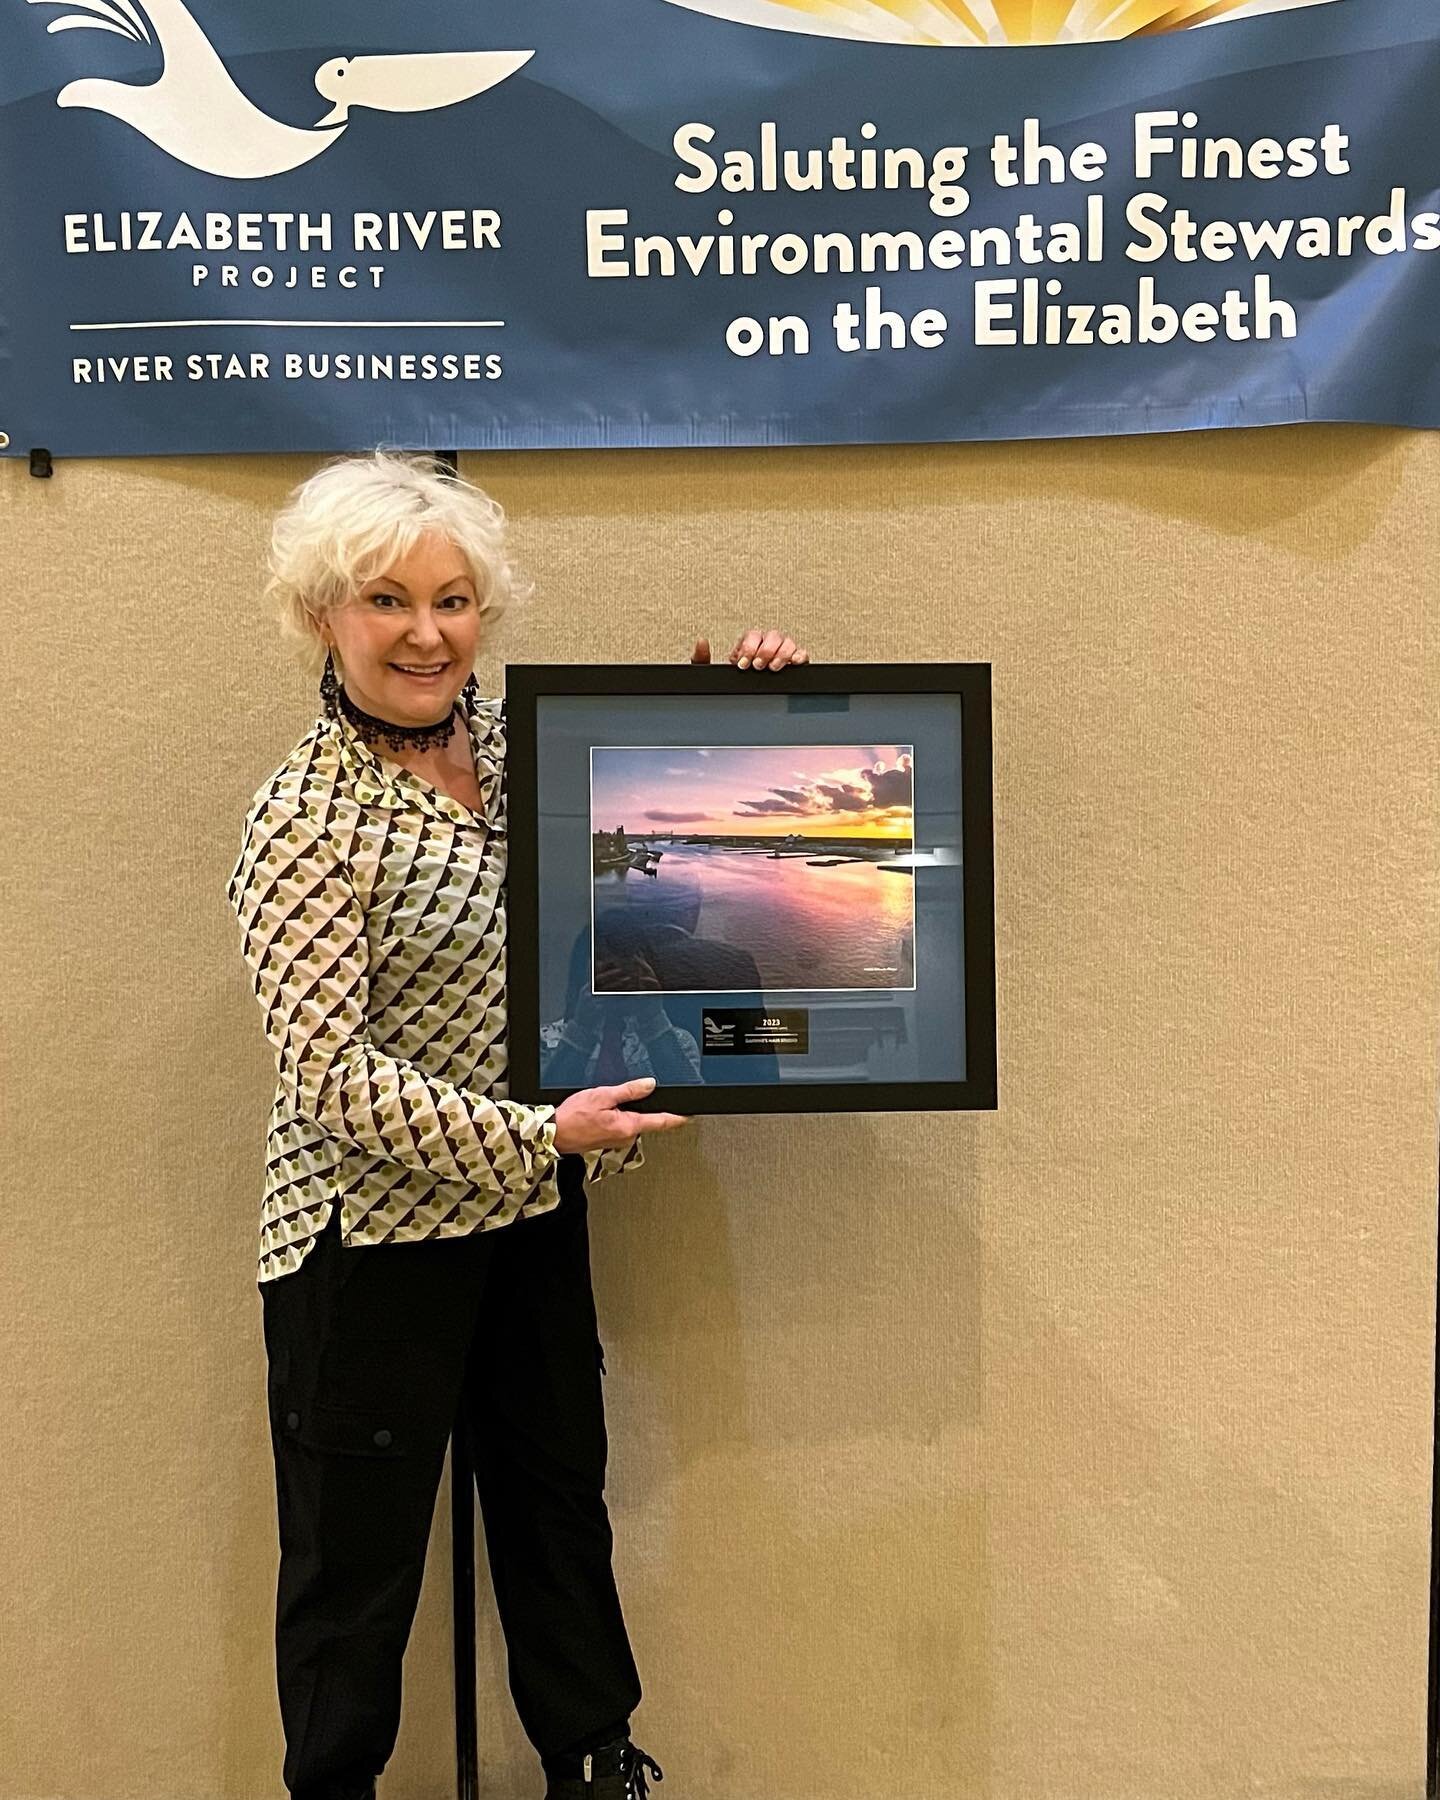 We are officially an @elizabethriverproject star business! We began this journey by refilling our clients @sevenhaircare care bottles. This has increased our environmental awareness!⭐️